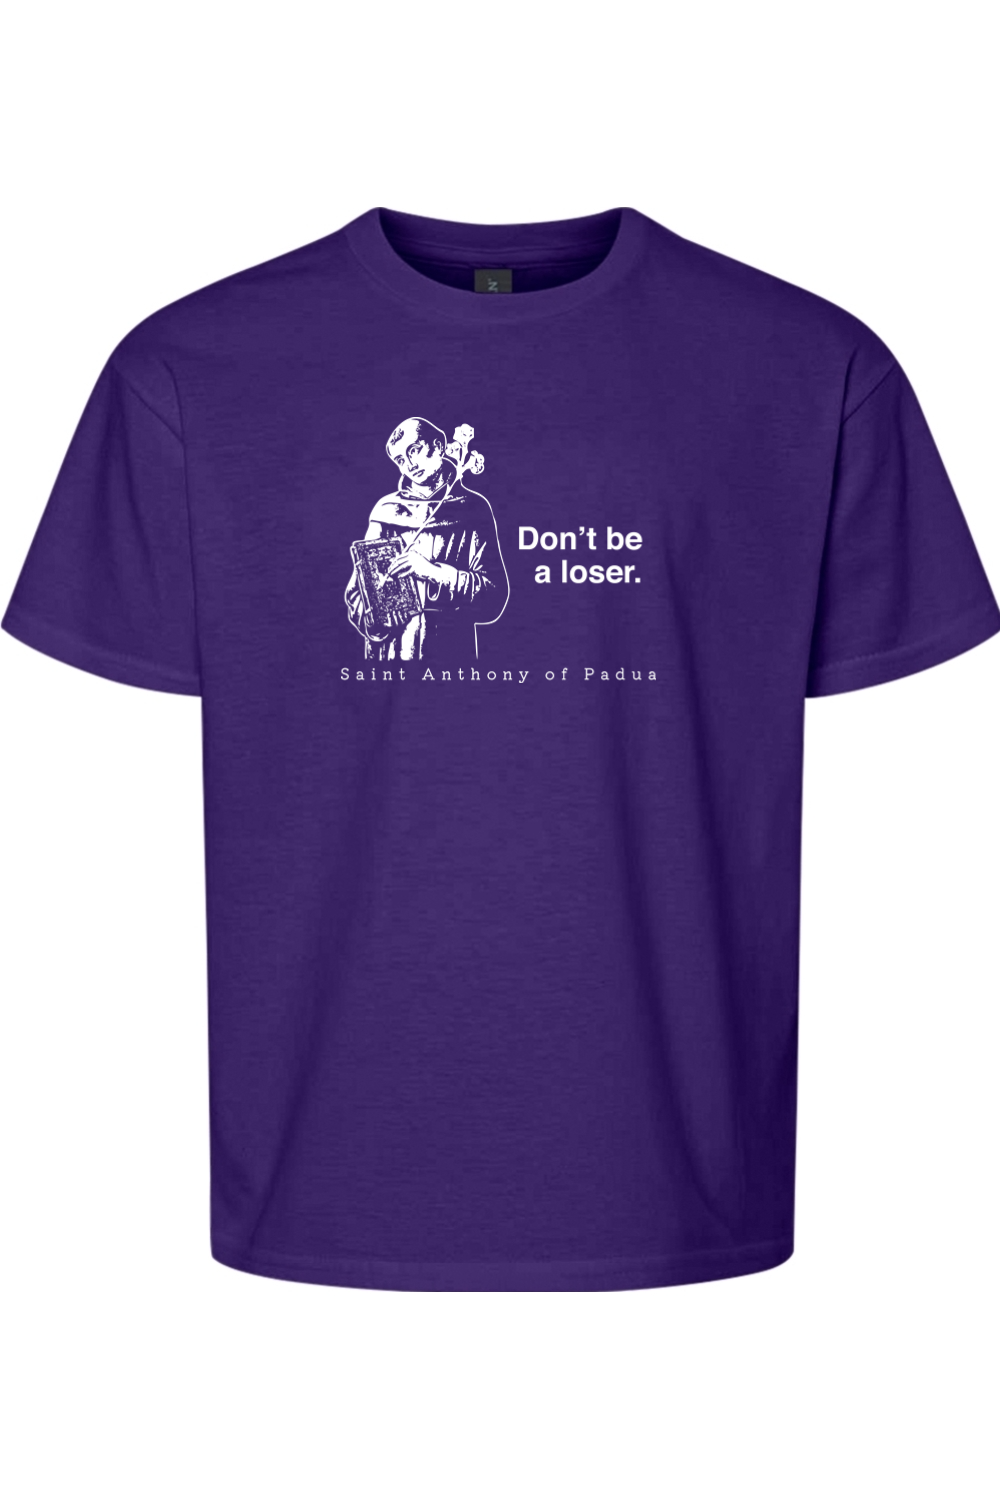 Don't Be a Loser - St Anthony of Padua Youth T-Shirt